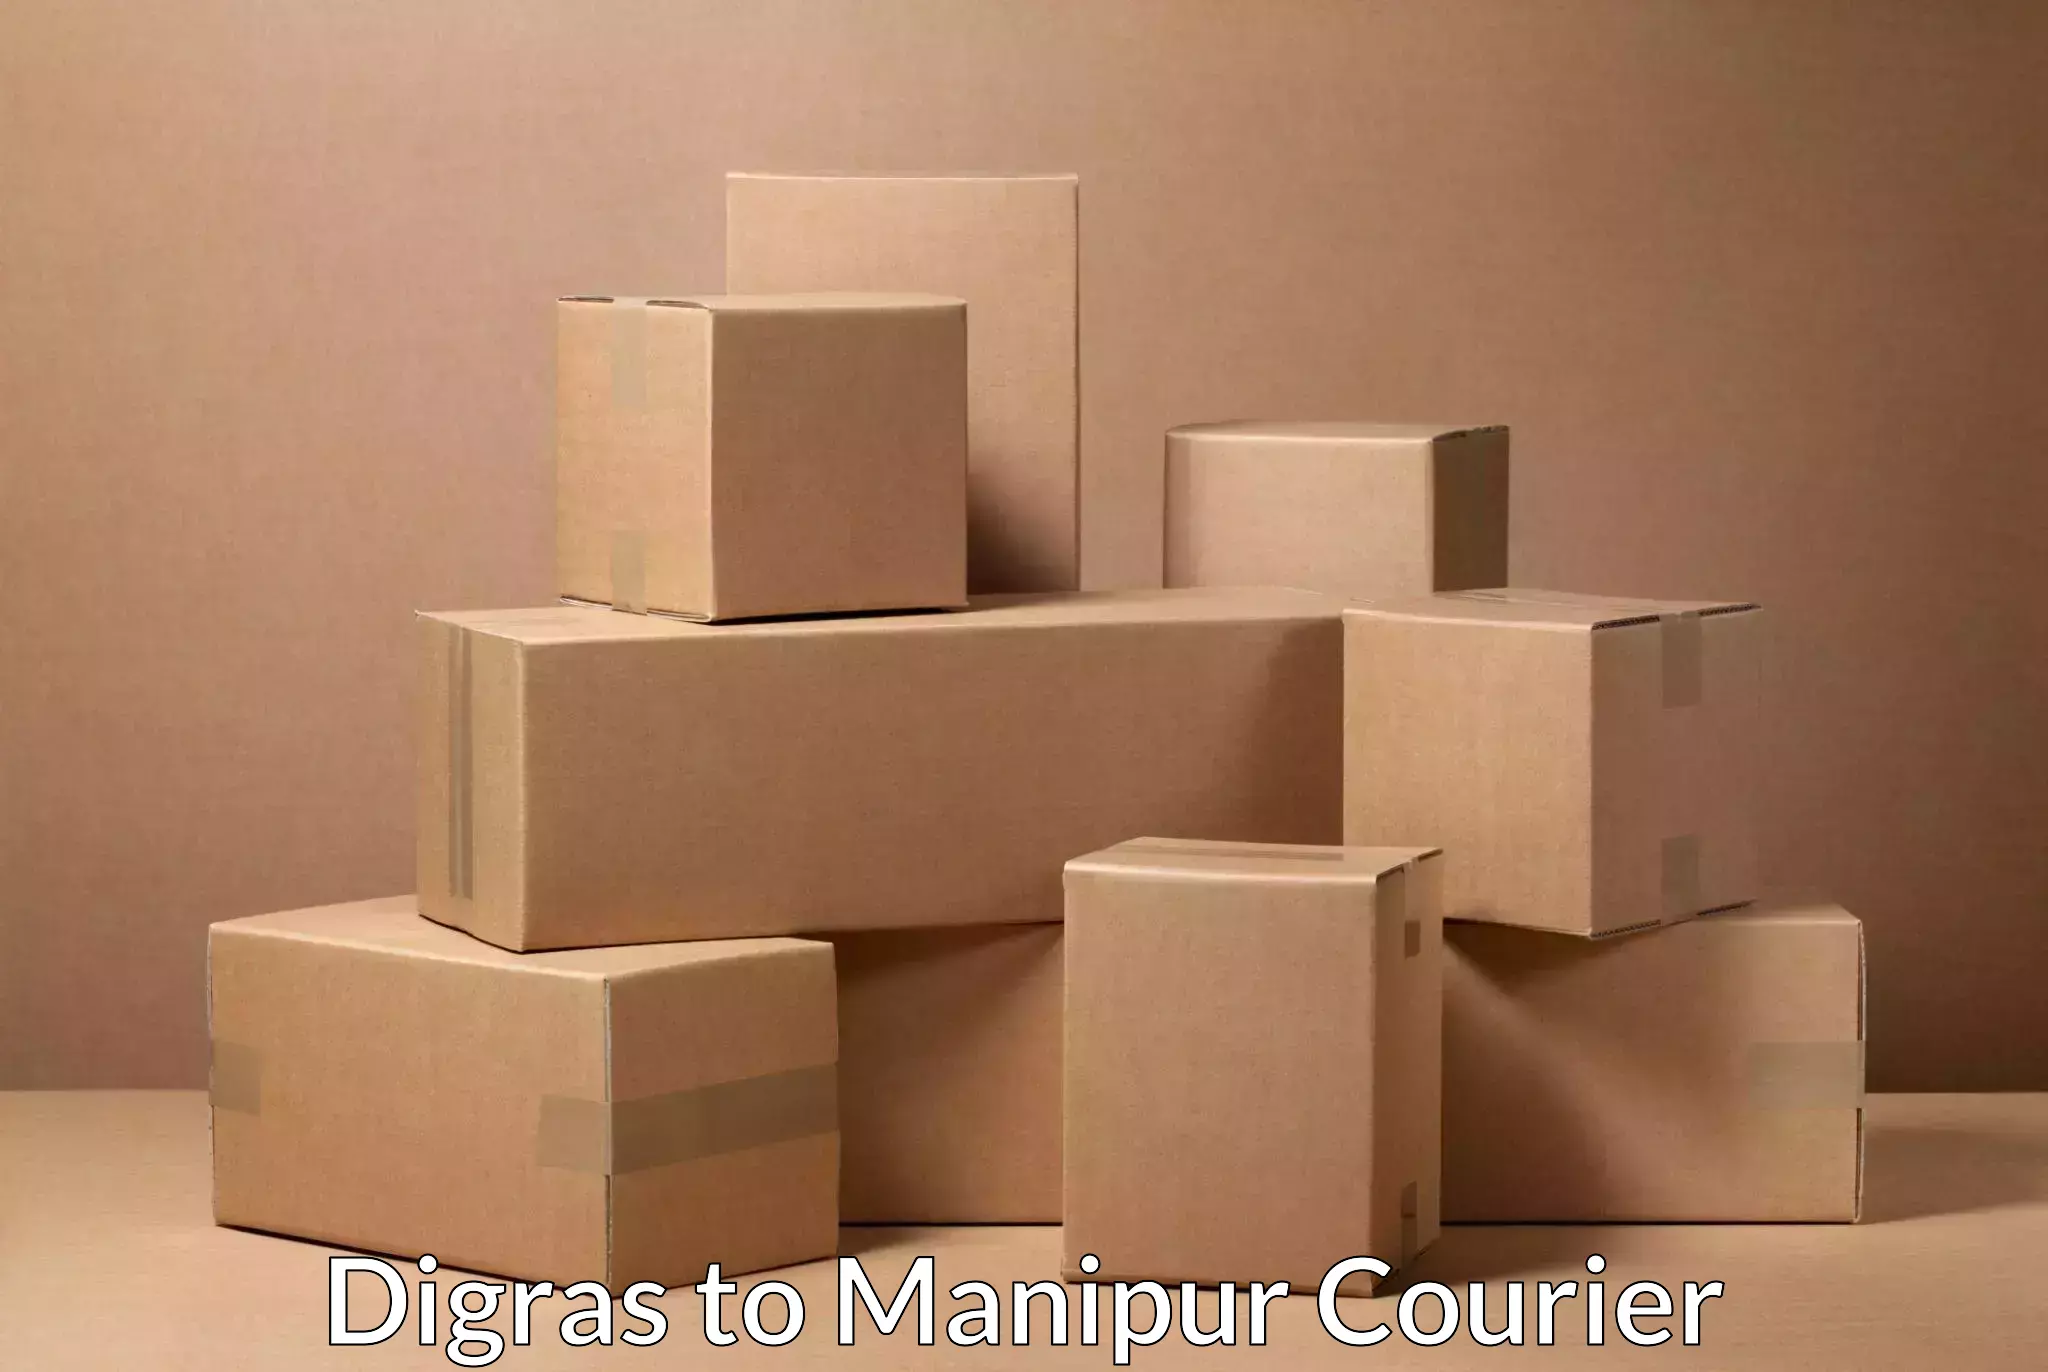 Fast shipping solutions Digras to Manipur